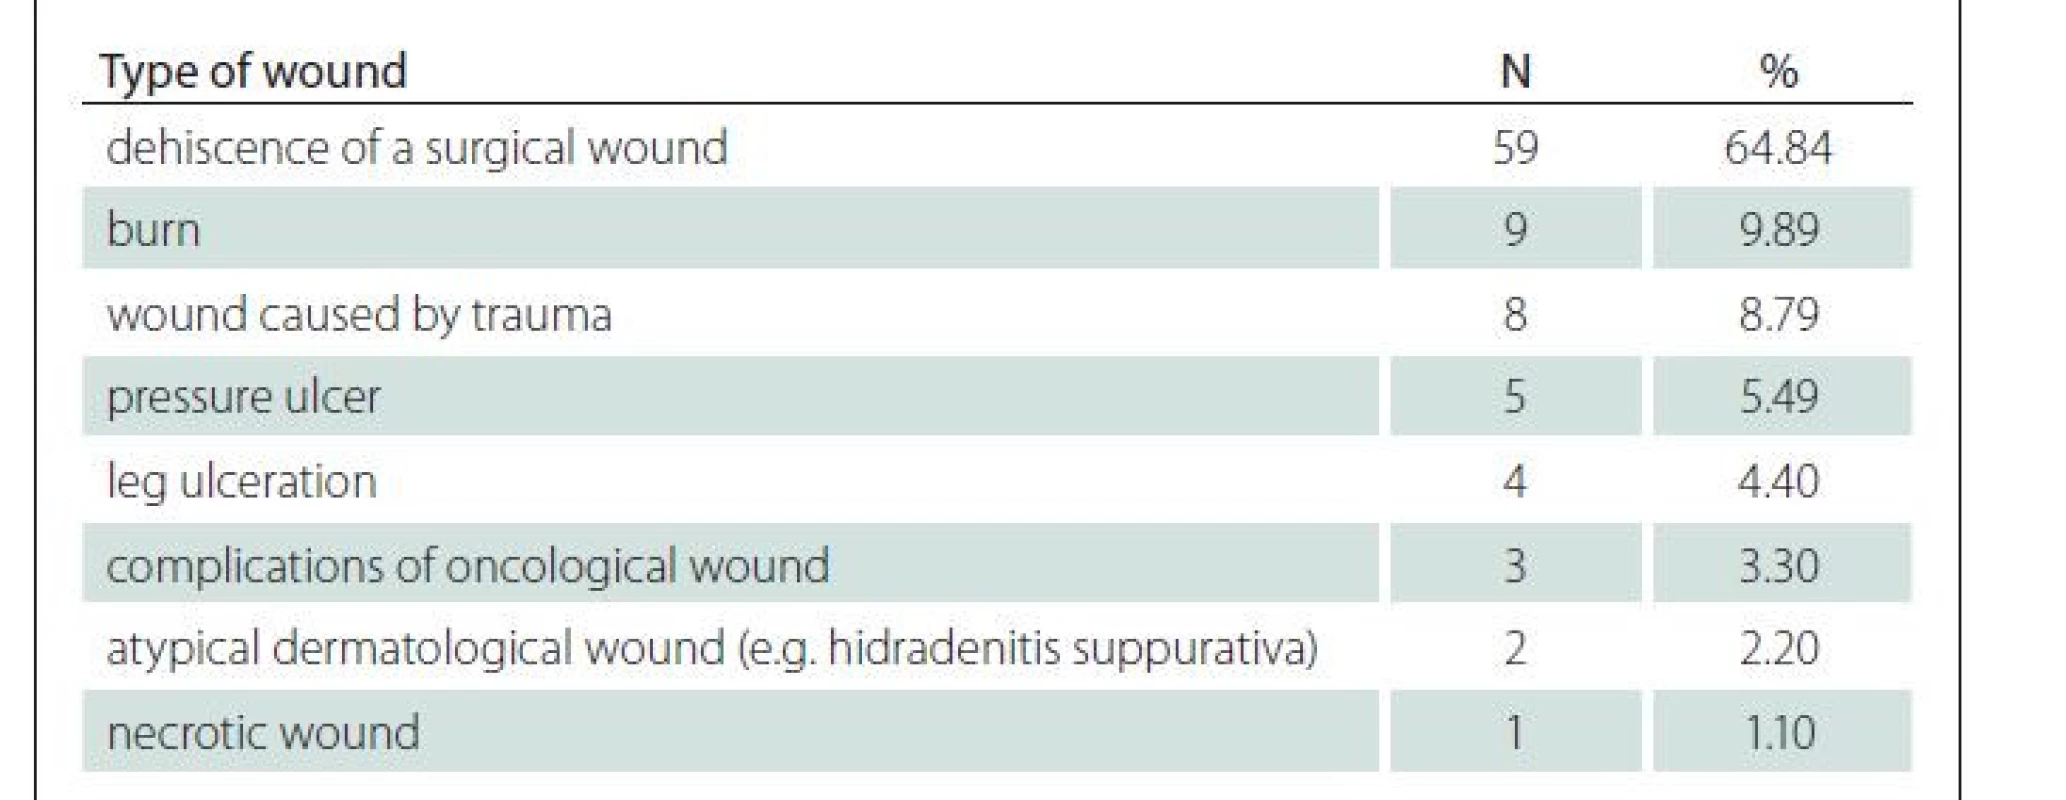 Wound types (hospitalisation in 2017).